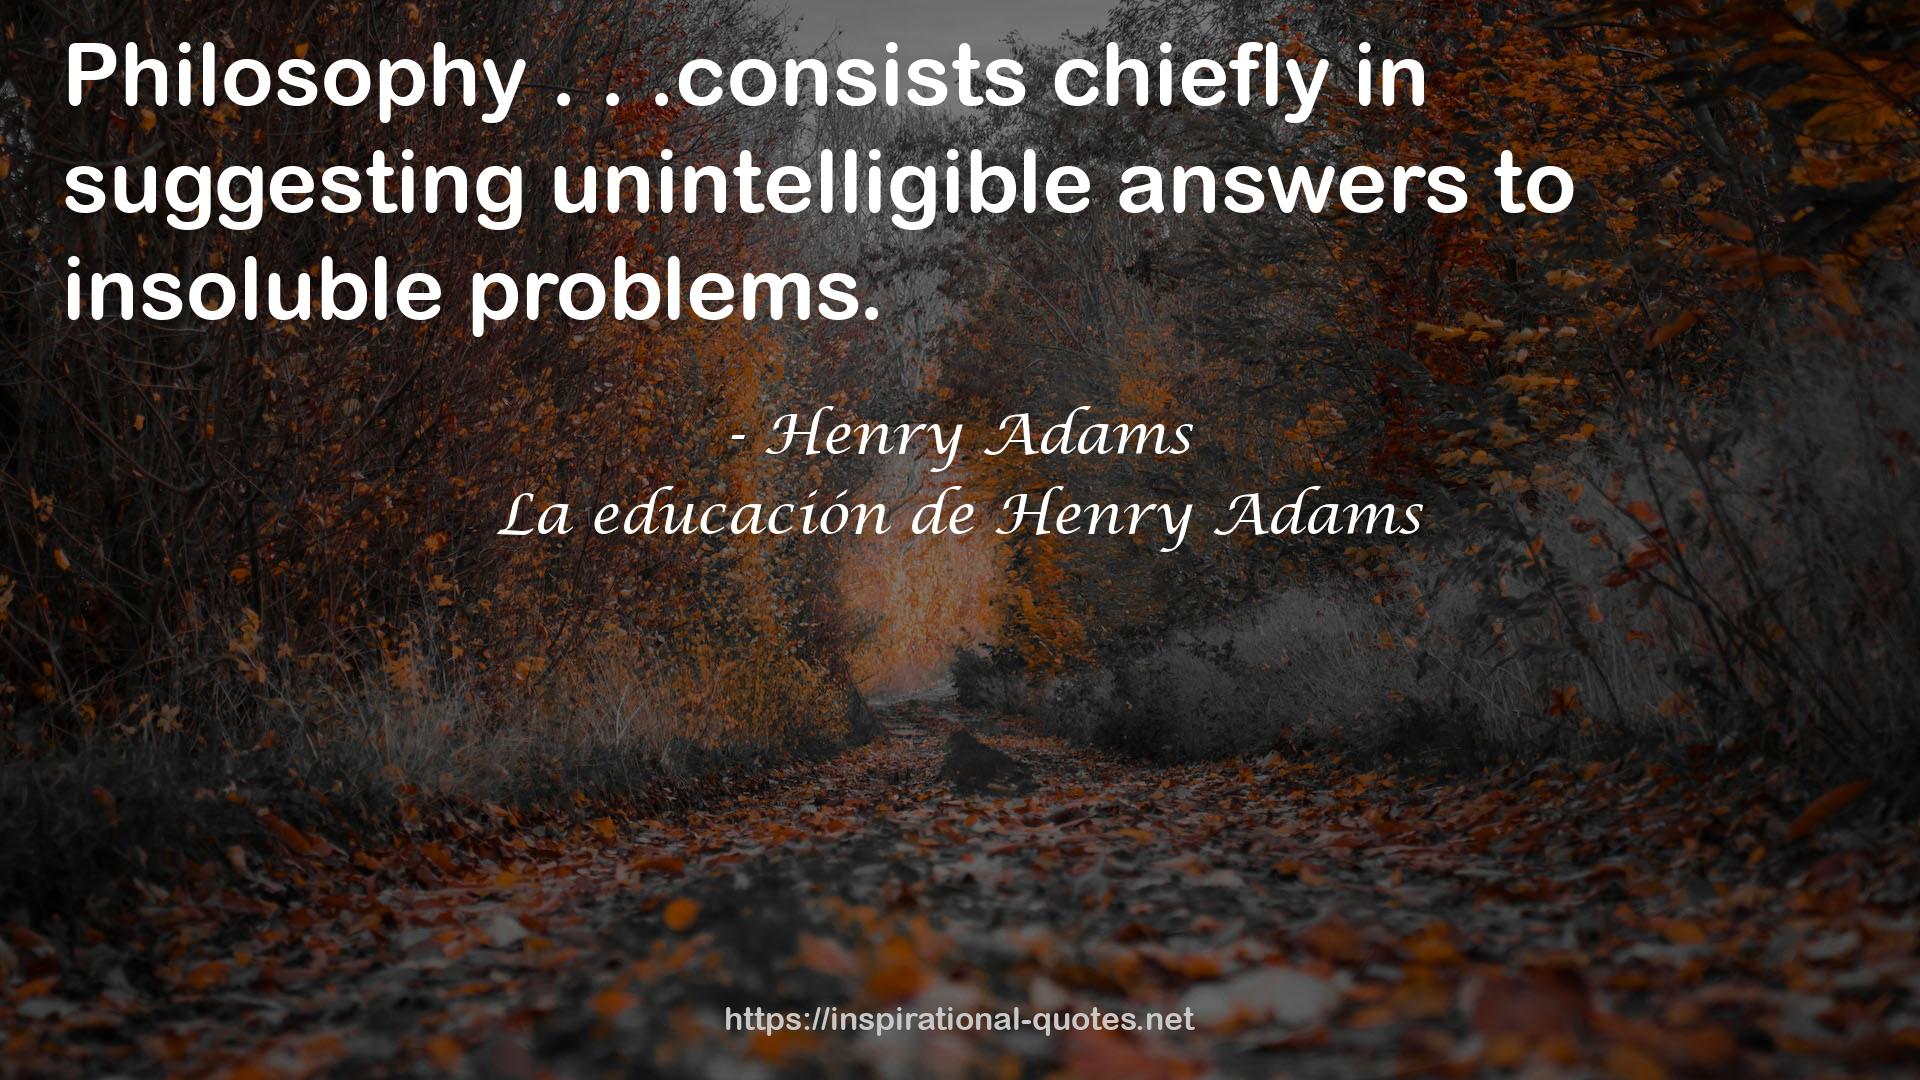 Henry Adams QUOTES